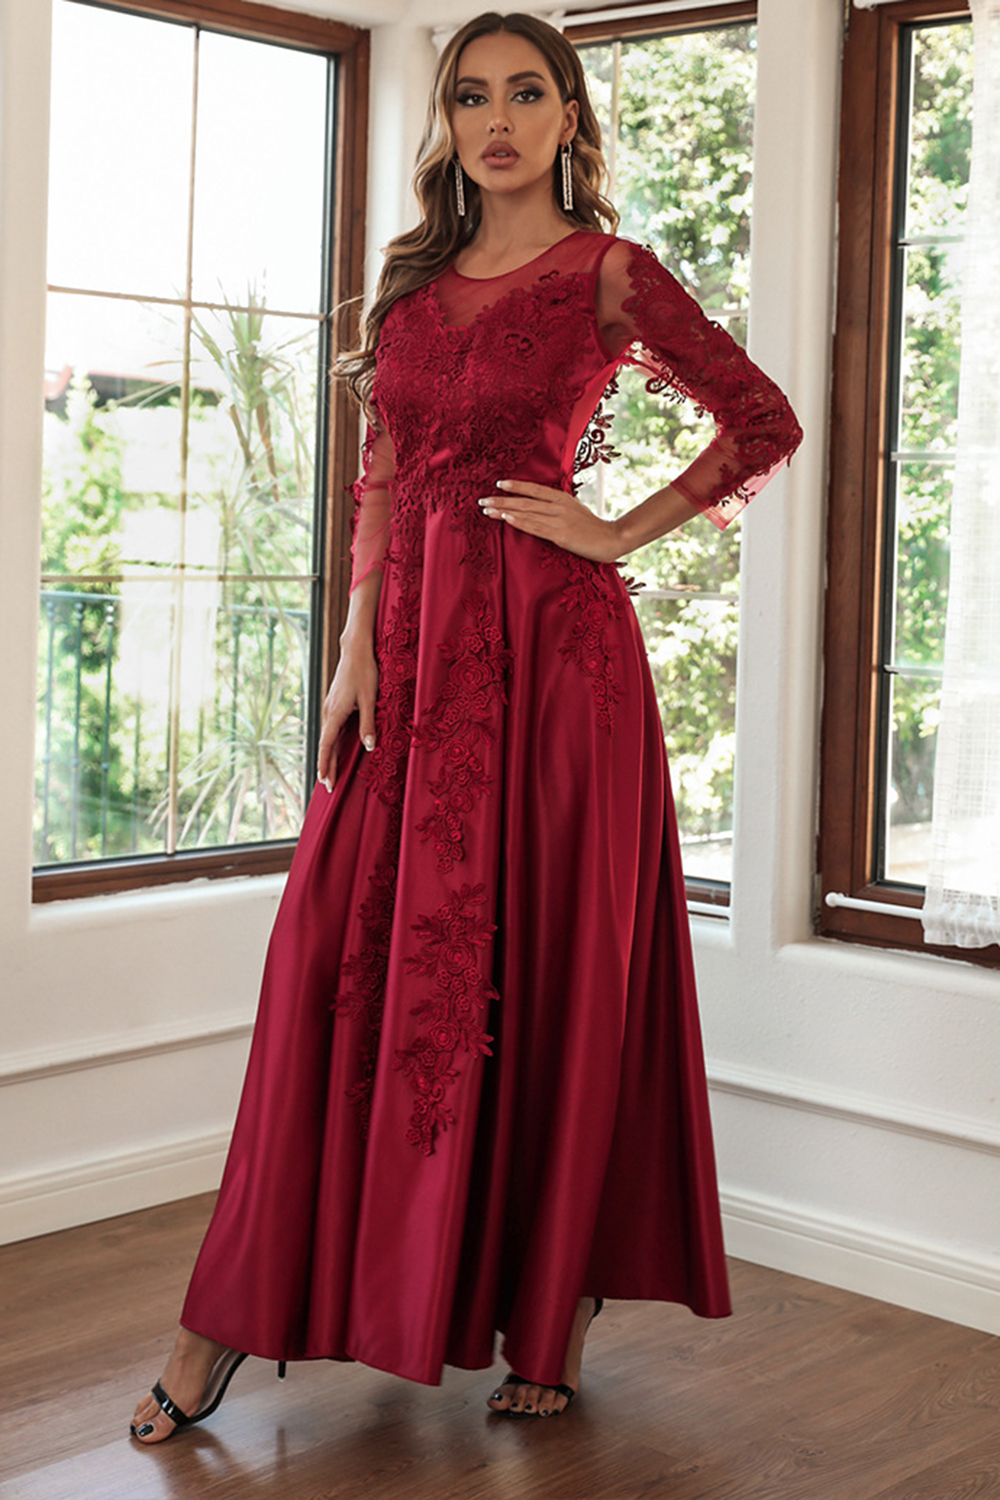 Wedding Guest Burgundy Lace Splicing 3/4 Sleeve Pleated Maxi Dress